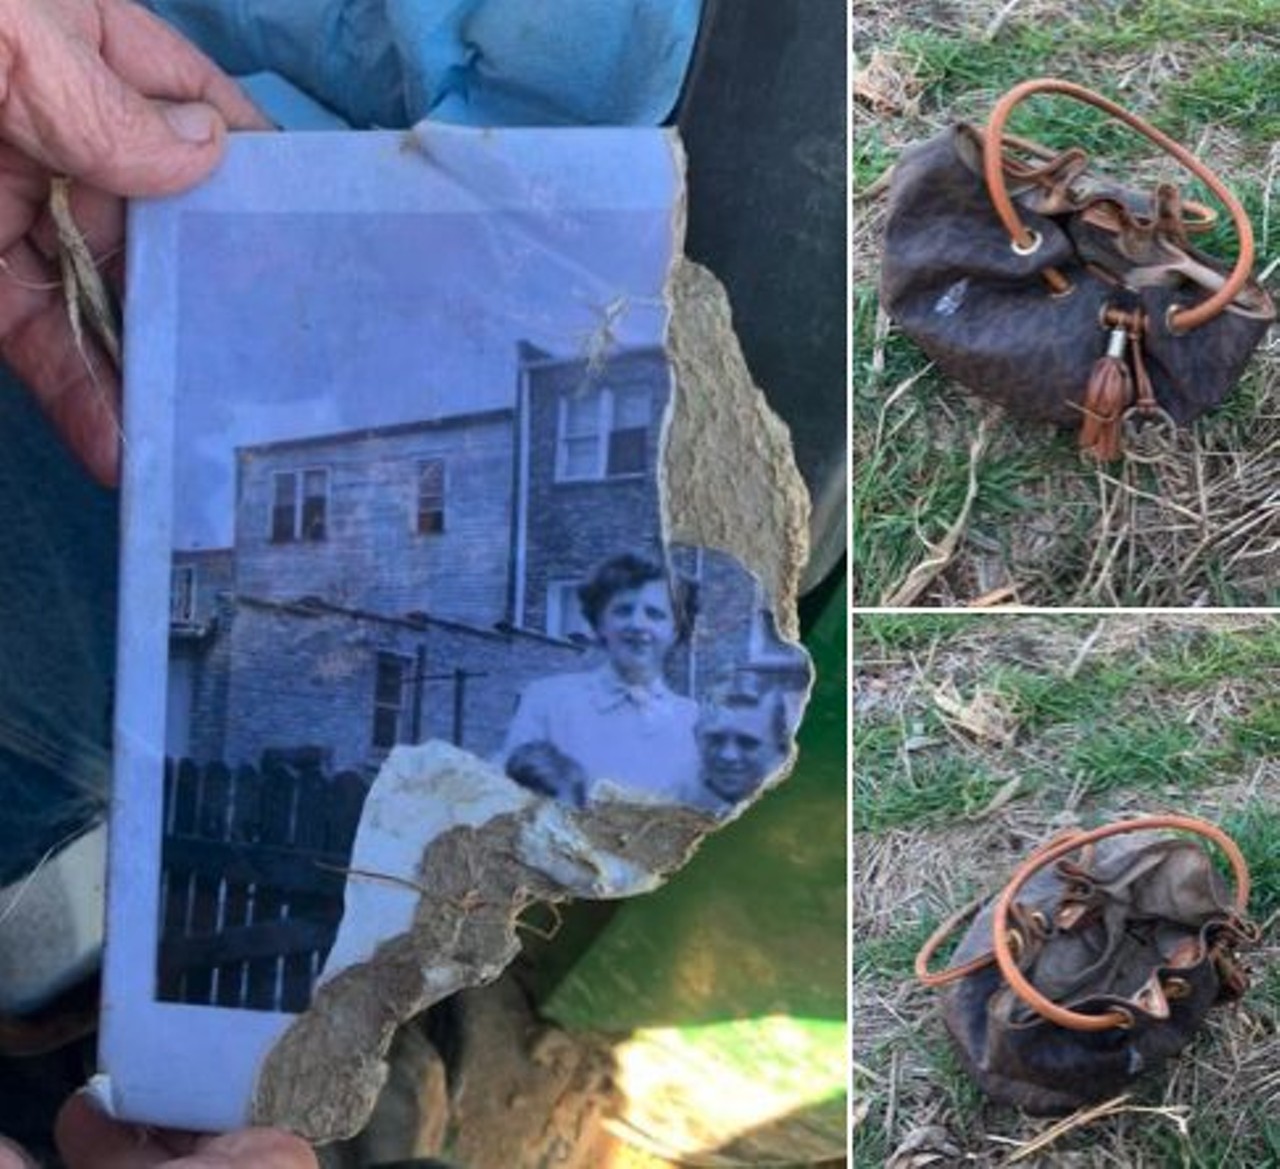 Found in Princeton, Kentucky
A photograph and empty Michael Kors bag, found in a wheat field.
Photo via Owen Kyler